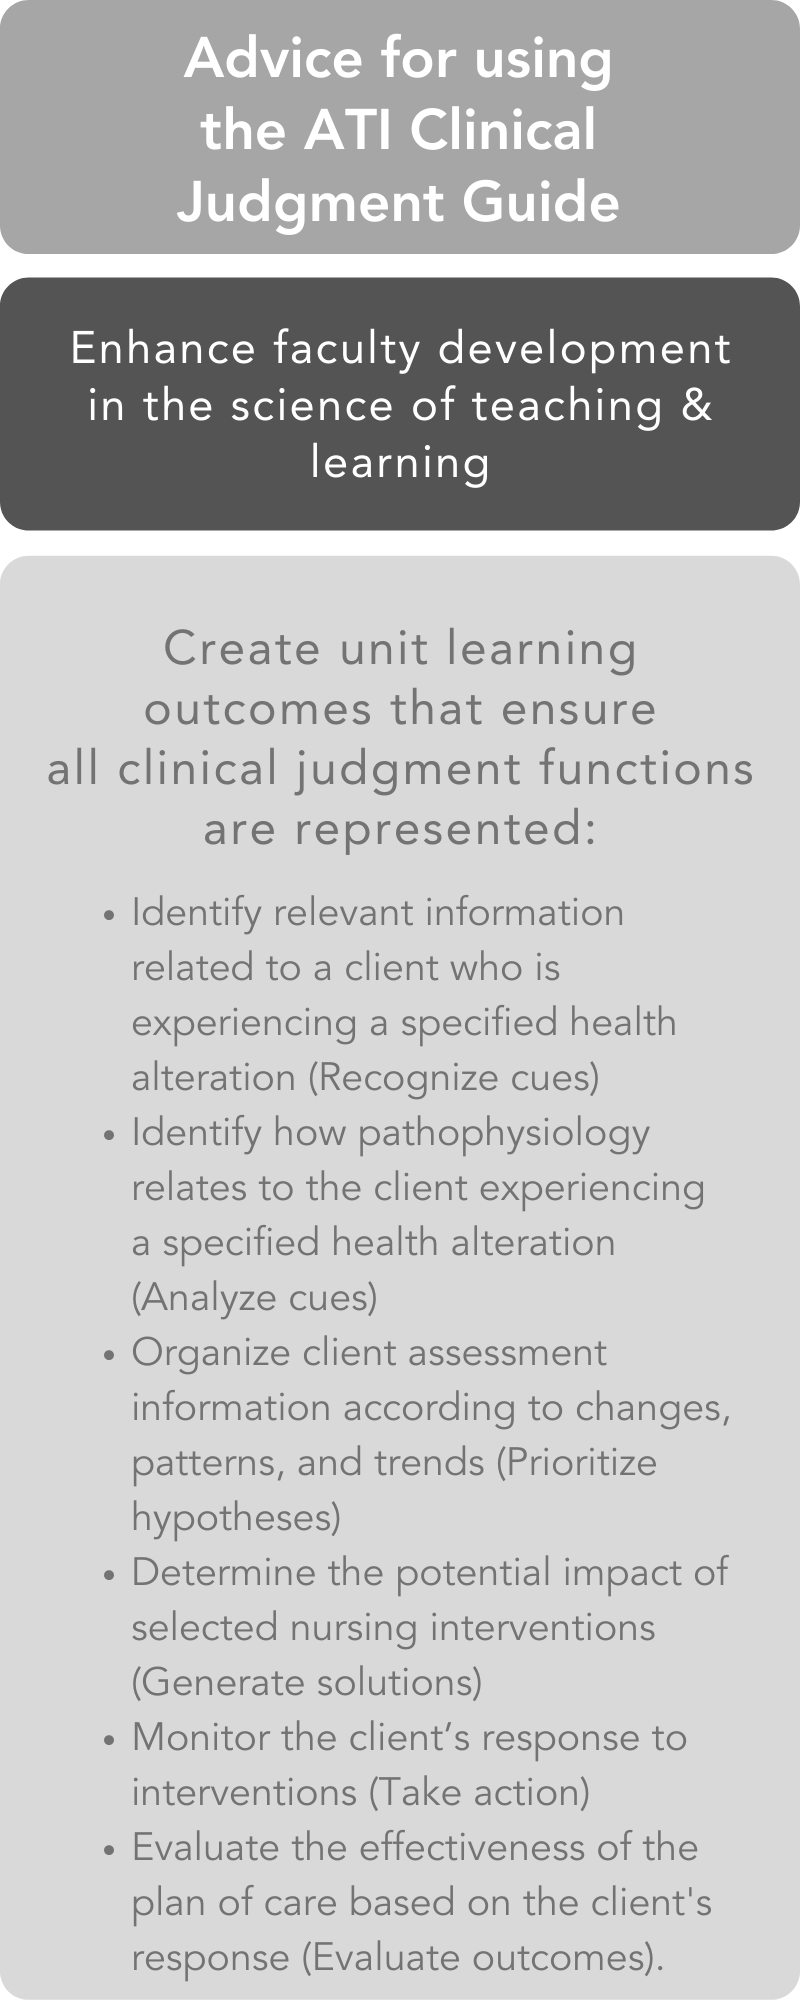 Clinical judgment: Teaching & learning